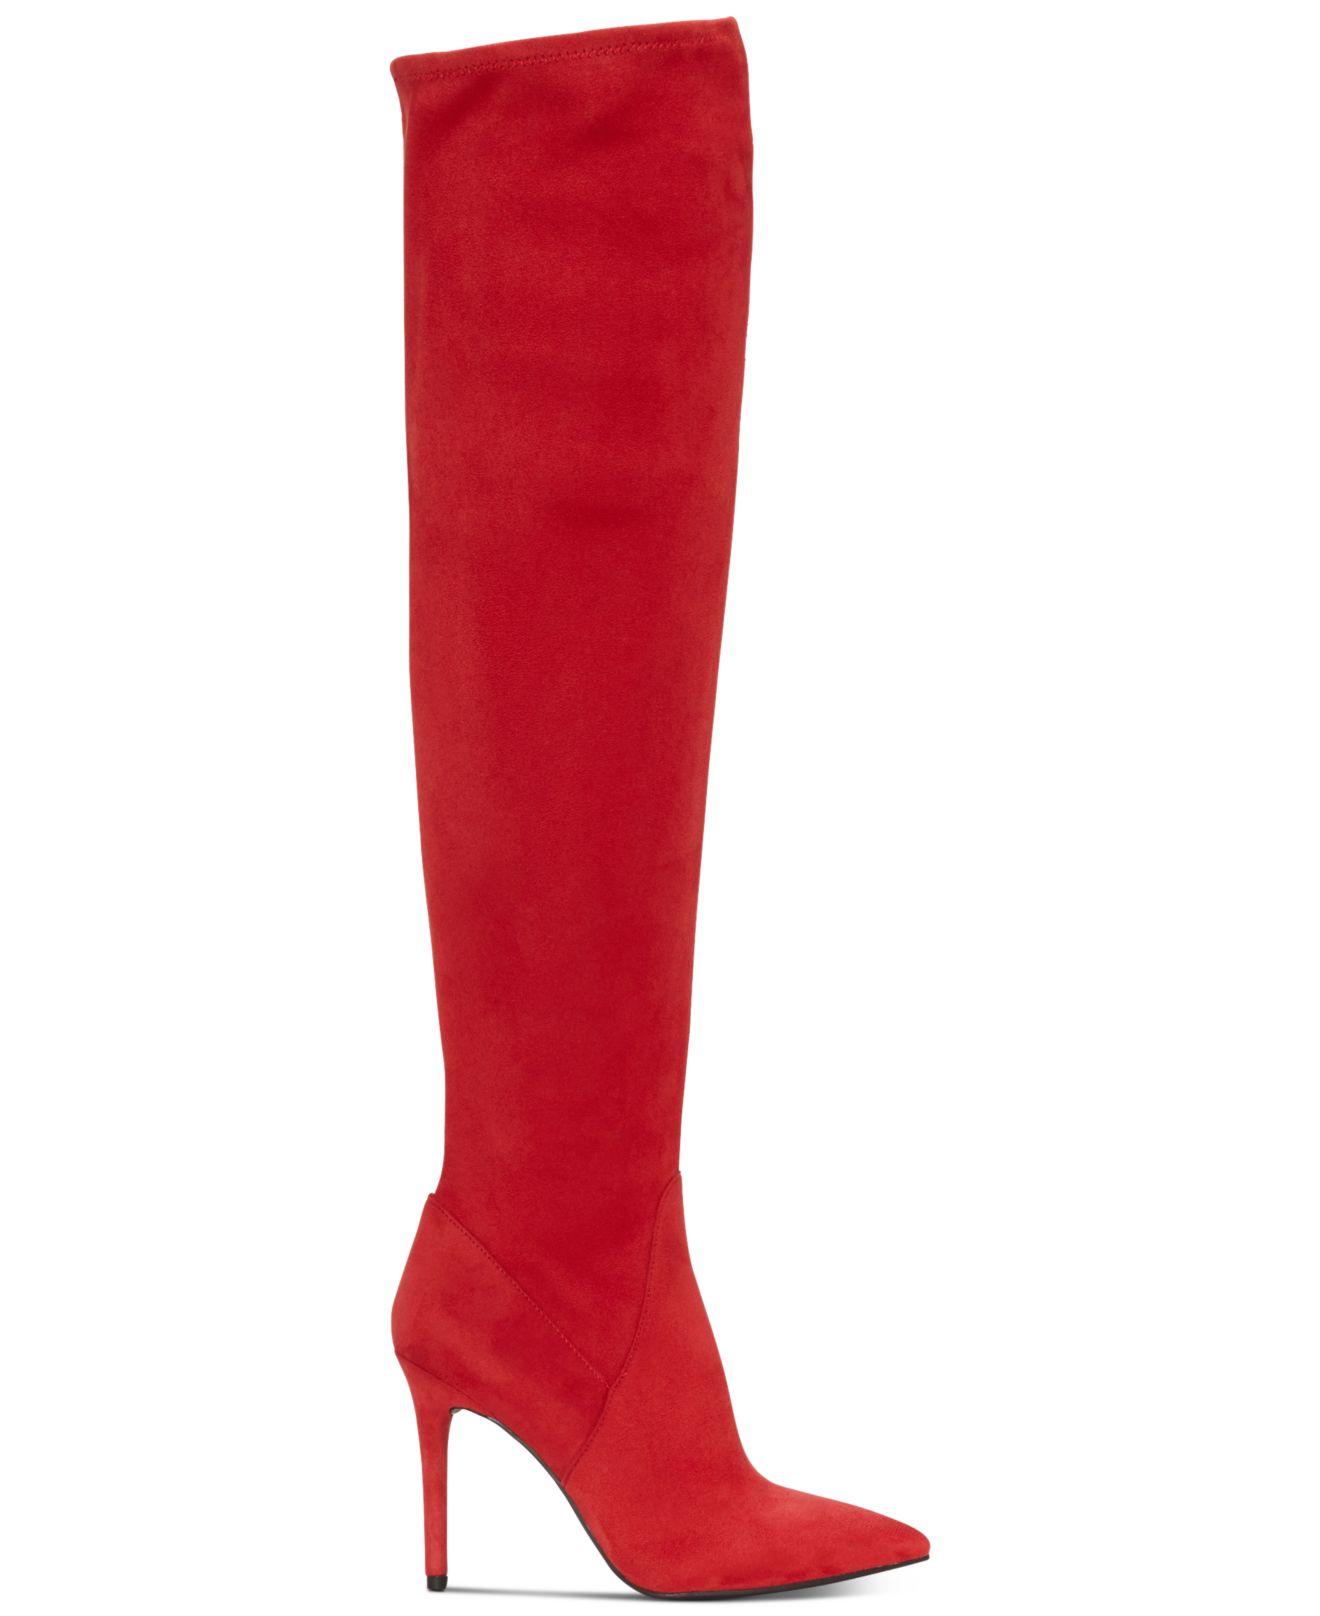 Jessica Simpson Livelle Over-the-knee Stretch Boots in Red - Lyst